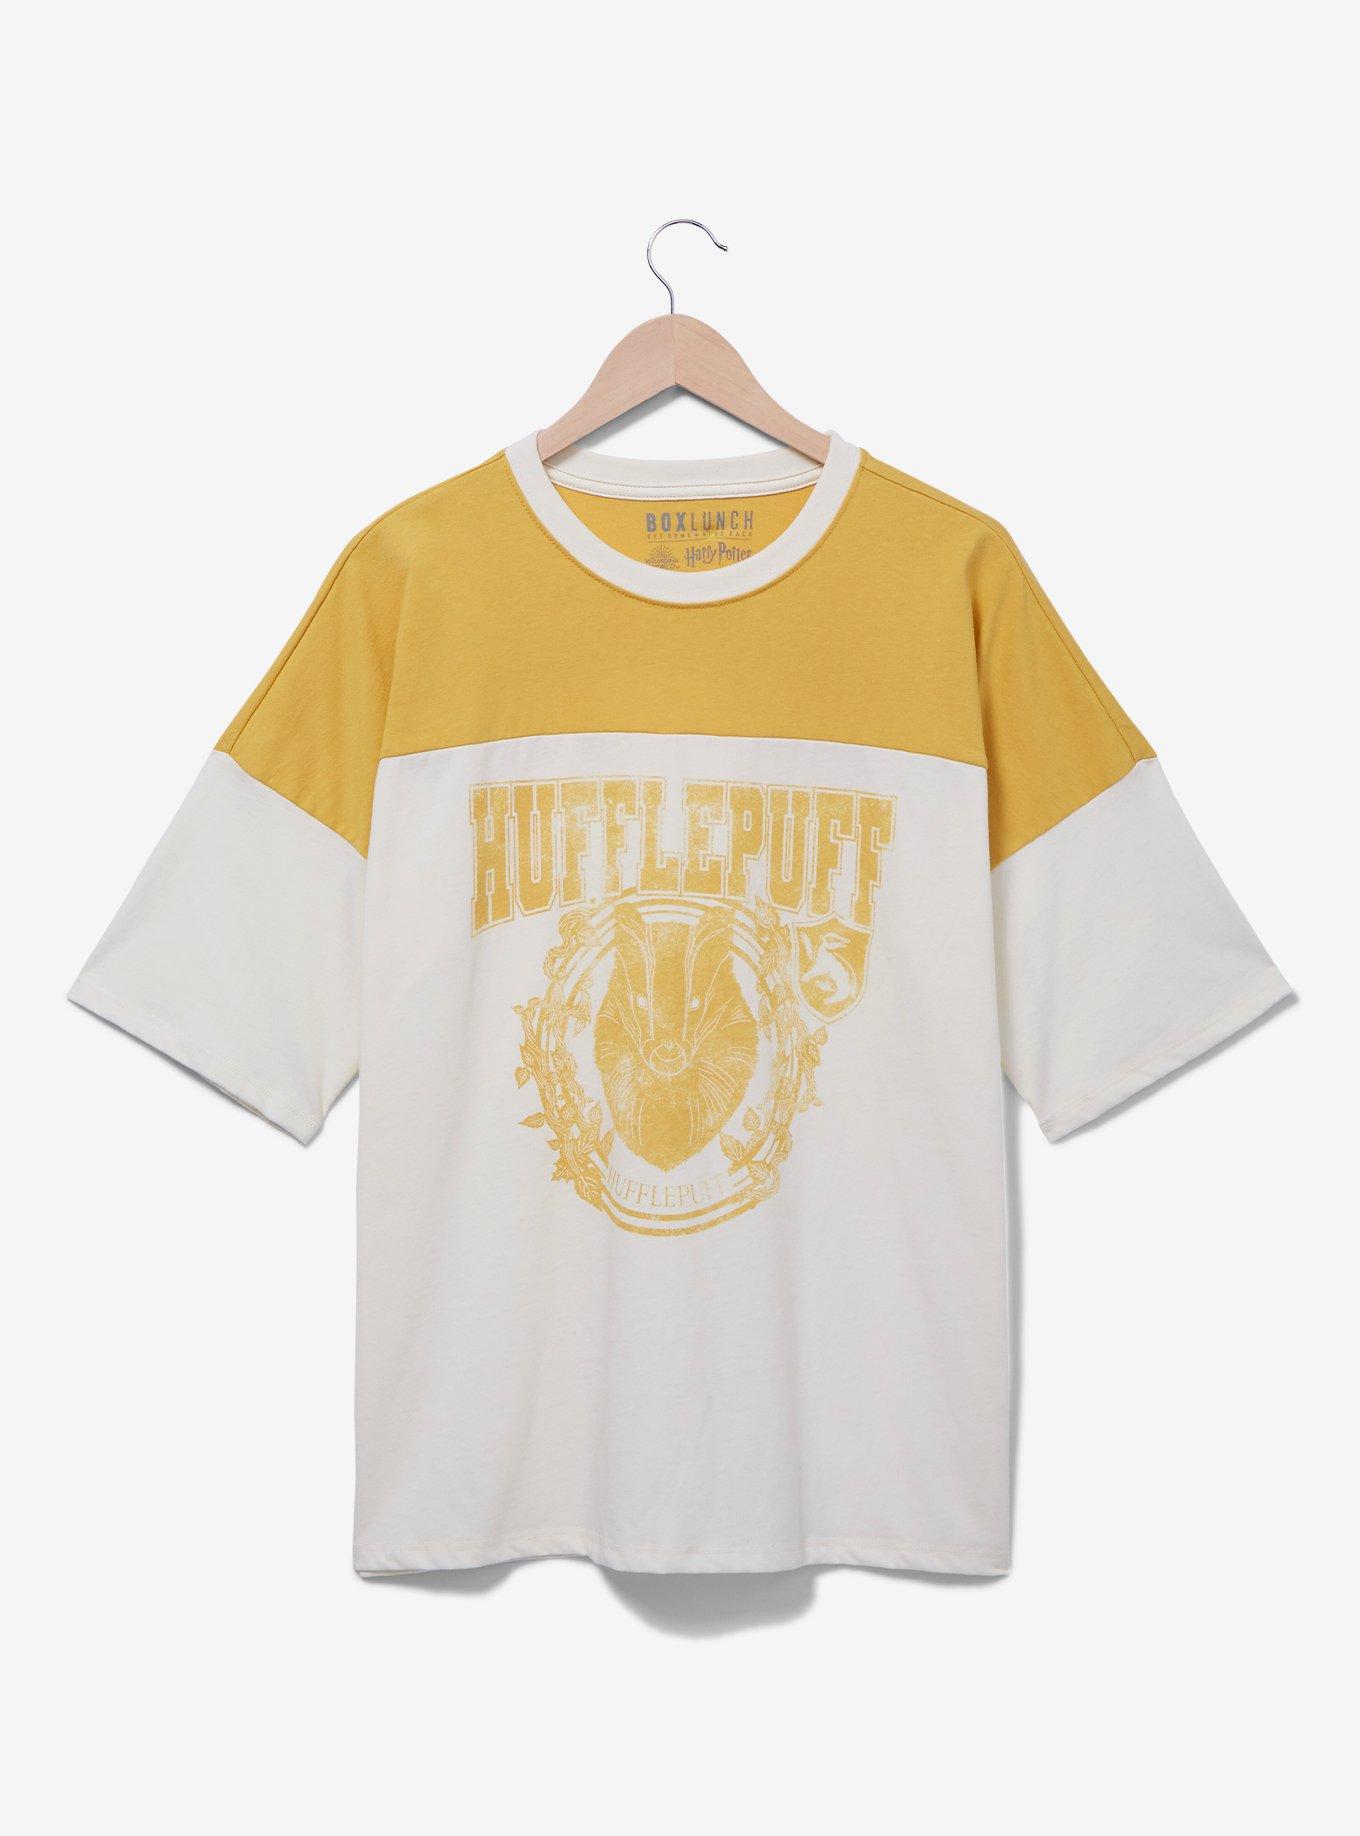 Harry Potter Hufflepuff Color Block Women's Varsity - BoxLunch Exclusive | BoxLunch